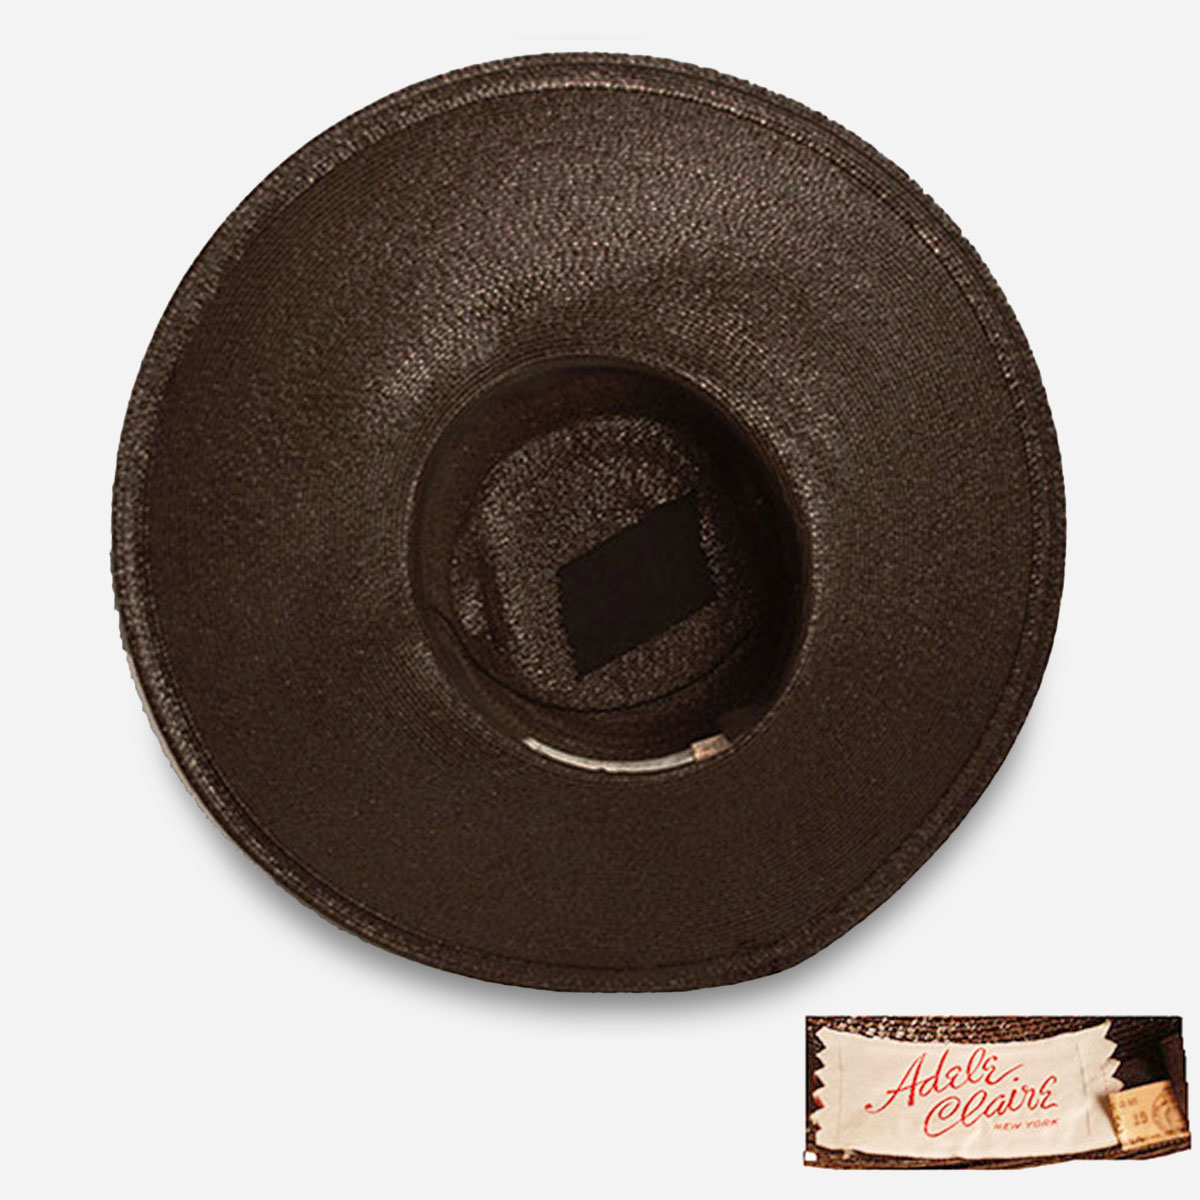 Adele Claire hat label